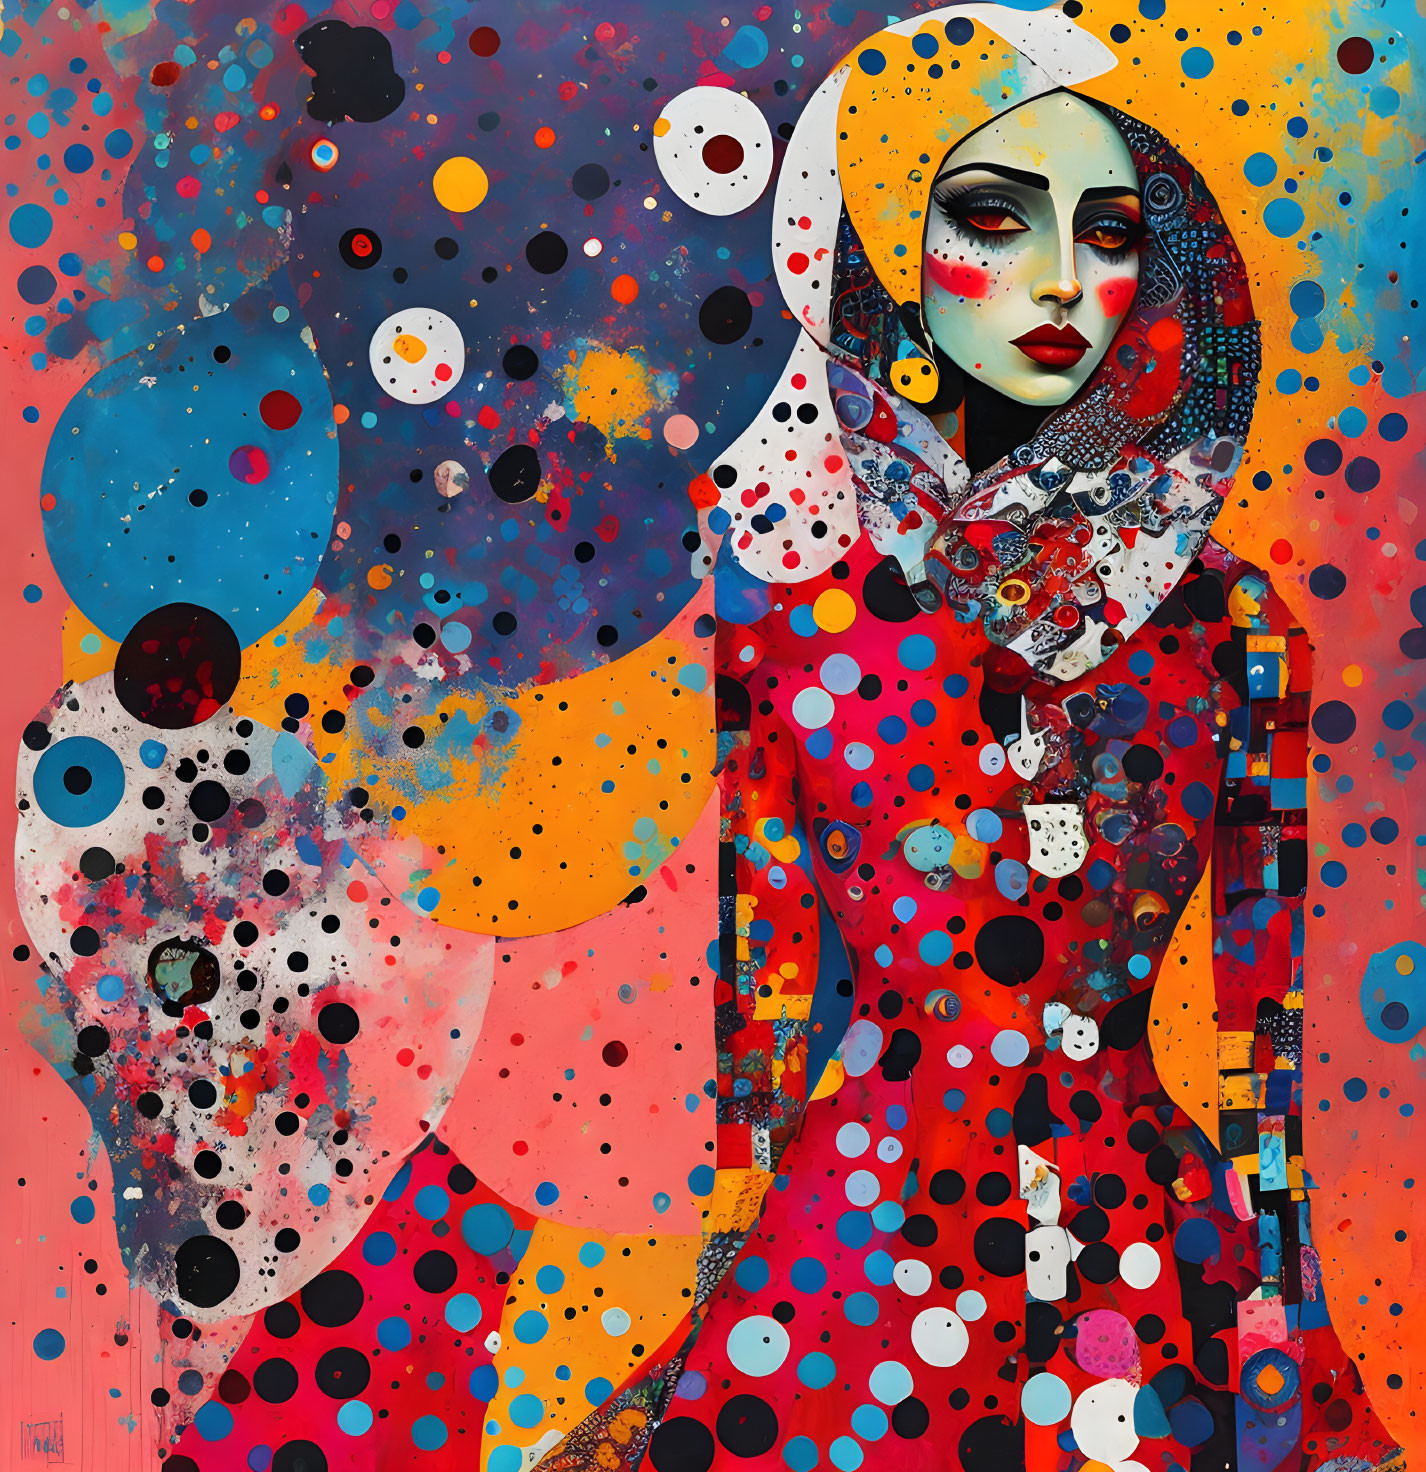 Colorful Abstract Portrait of Woman with Dotted Patterns and Bold Colors